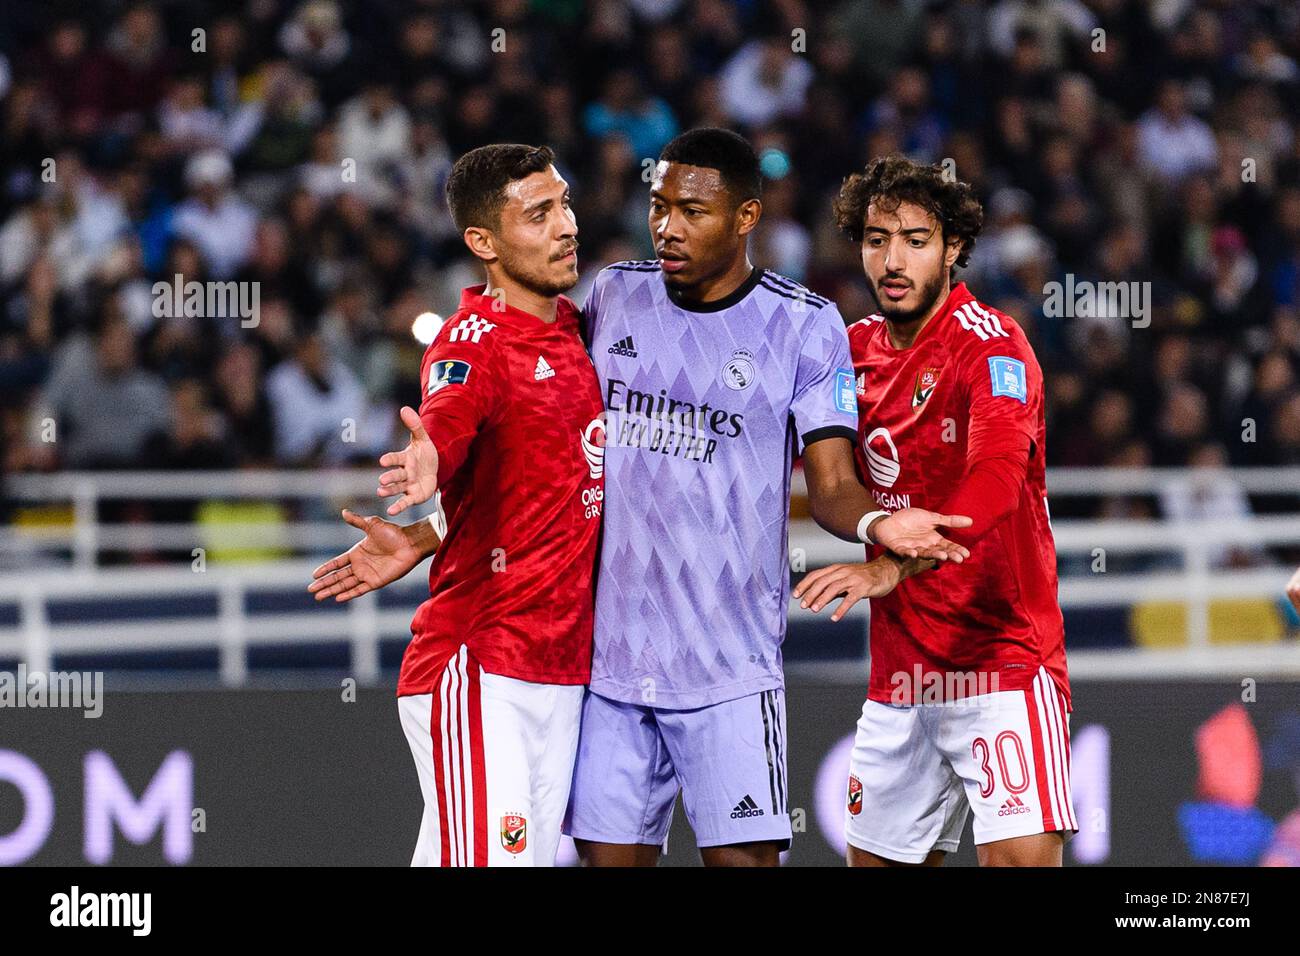 Rabat, Morocco. 08th Feb, 2023. Prince Moulay Abdellah Rabat, Morocco - February 08: Mohamed Sherif (L) and Mohamed Hany of Al Ahly (R) fights for position with David Alaba of Real Madrid (C) during the FIFA Club World Cup Morocco 2022 Semi Final match between Al Ahly v Real Madrid CF at Prince Moulay Abdellah on February 8, 2023 in Rabat, Morocco. (Photo by Marcio Machado/Eurasia Sport Images) (Eurasia Sport Images/SPP) Credit: SPP Sport Press Photo. /Alamy Live News Stock Photo